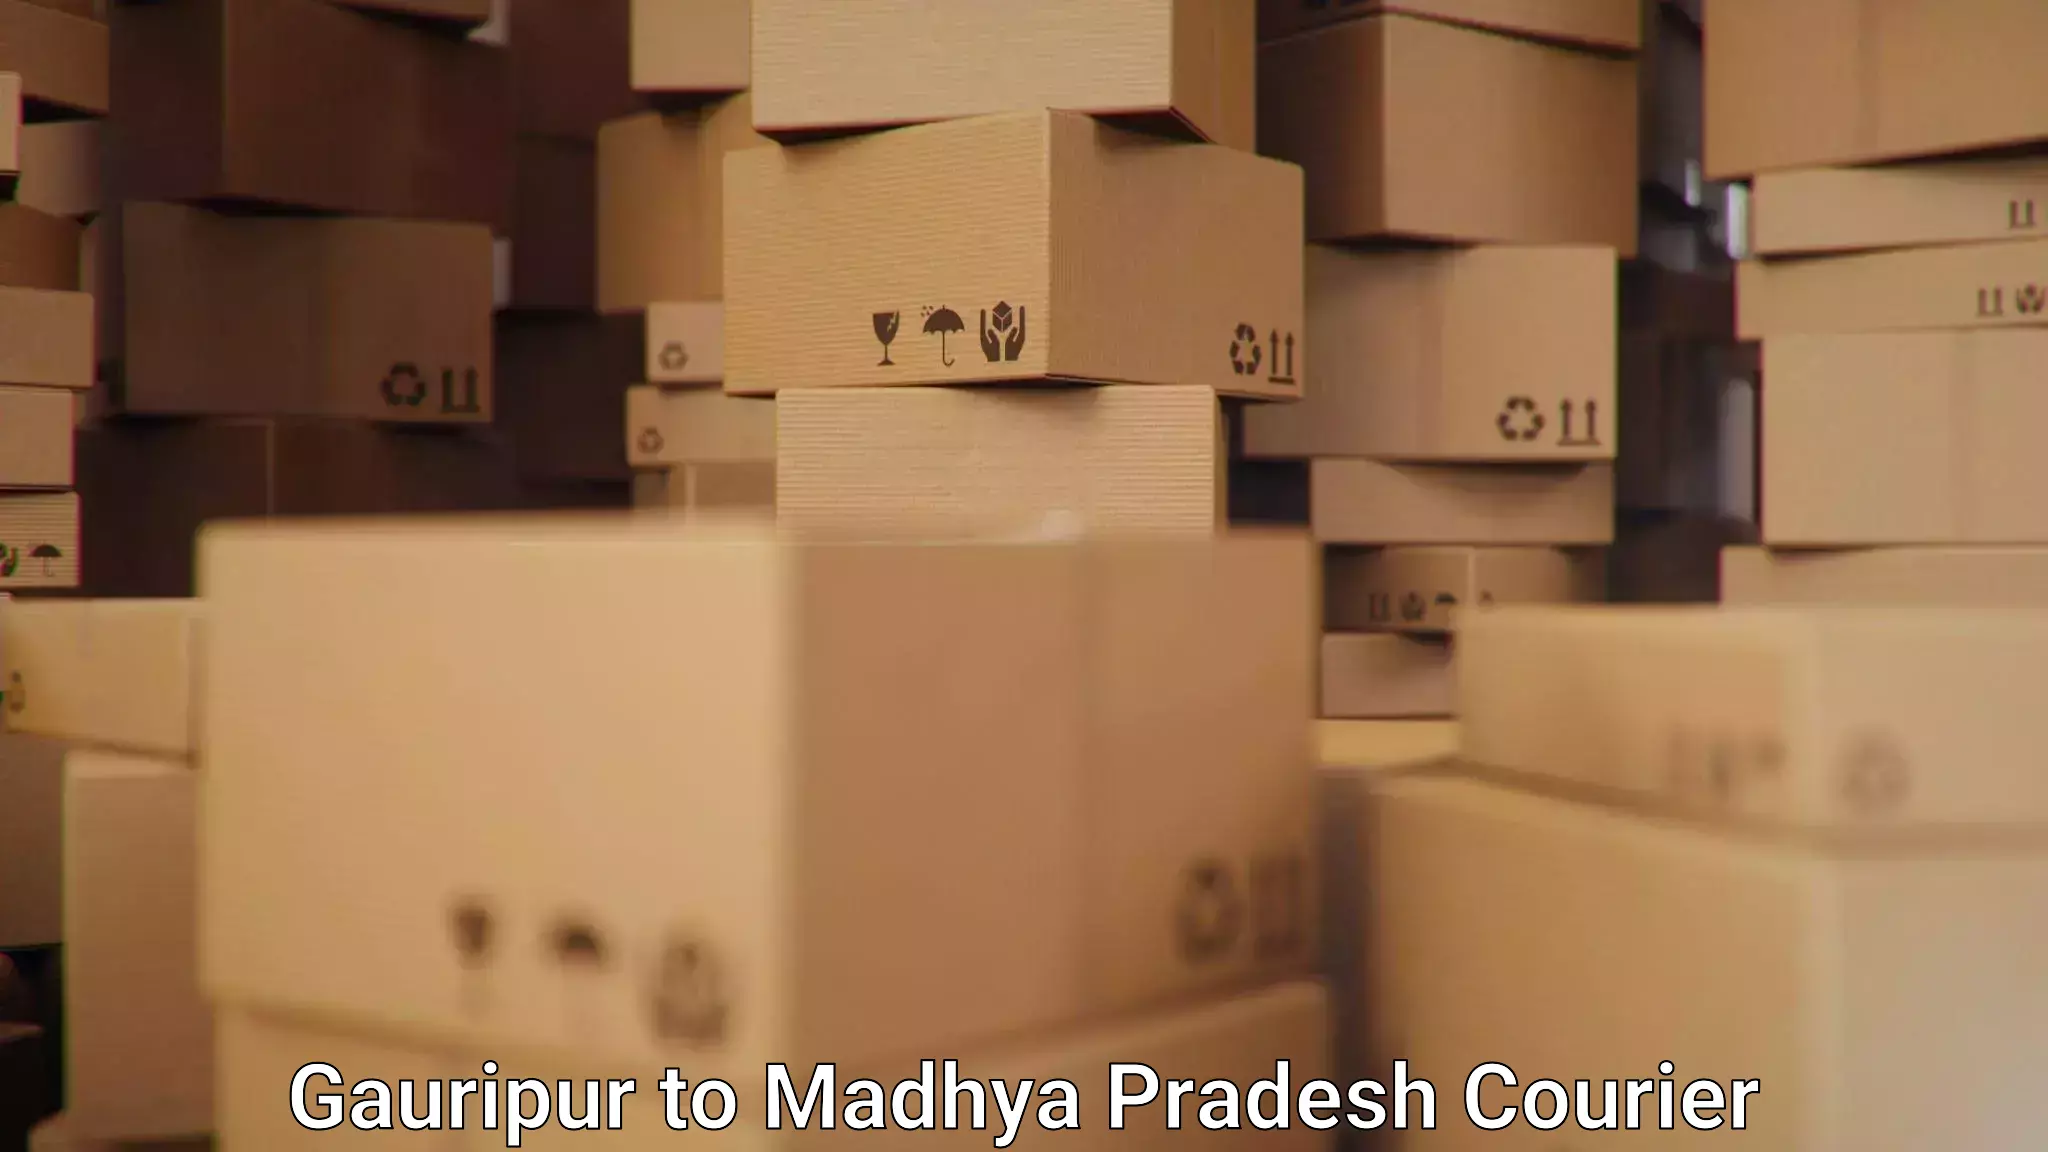 Courier service partnerships Gauripur to Mandideep